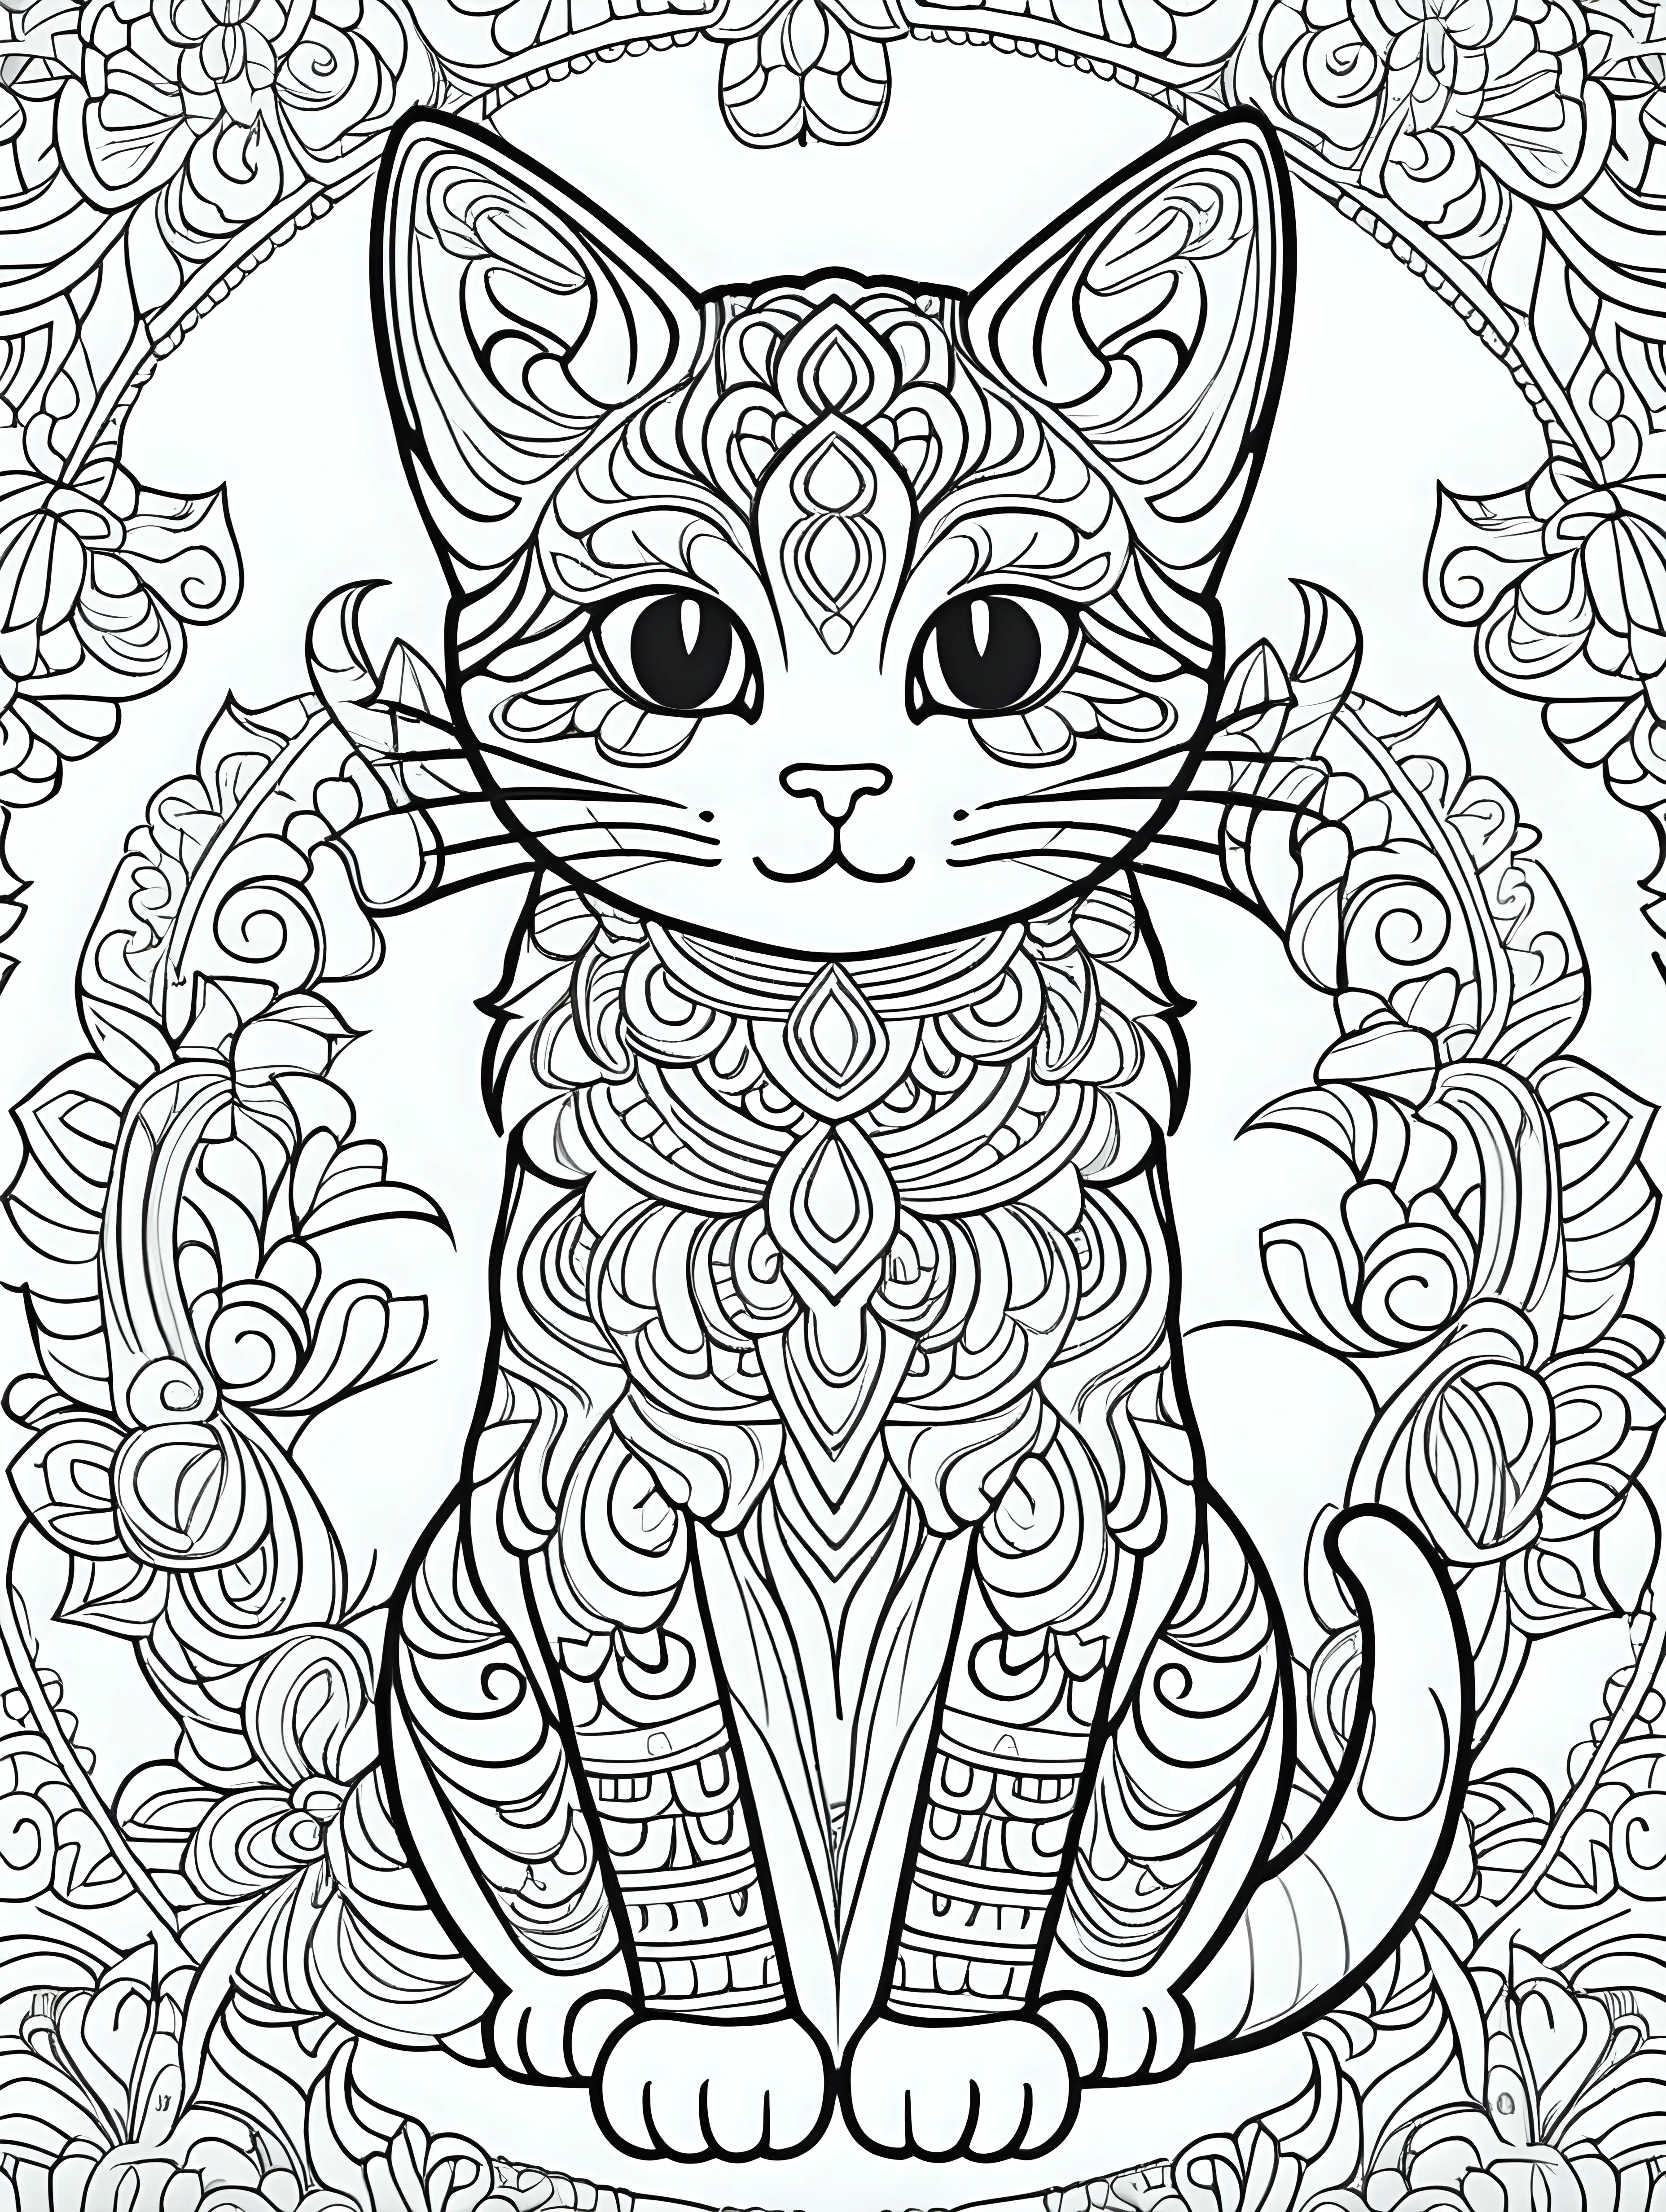 Mandala Cat Coloring Book Page in Cartoon Style